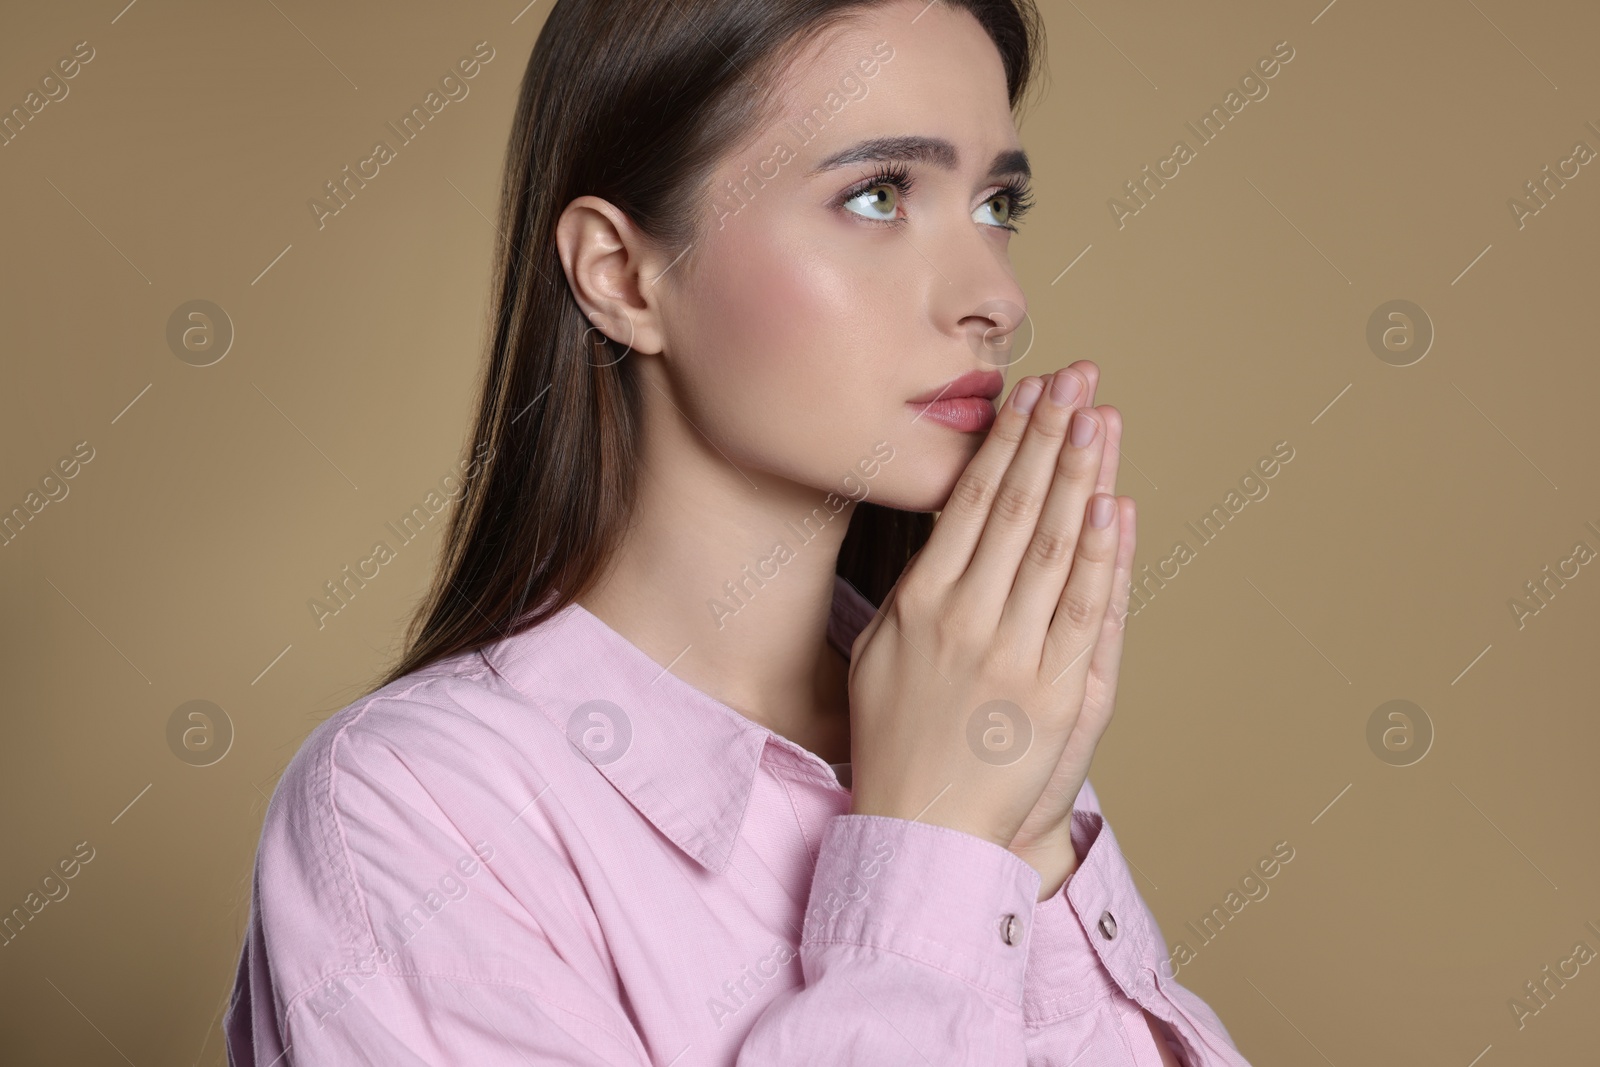 Photo of Woman with clasped hands praying on beige background